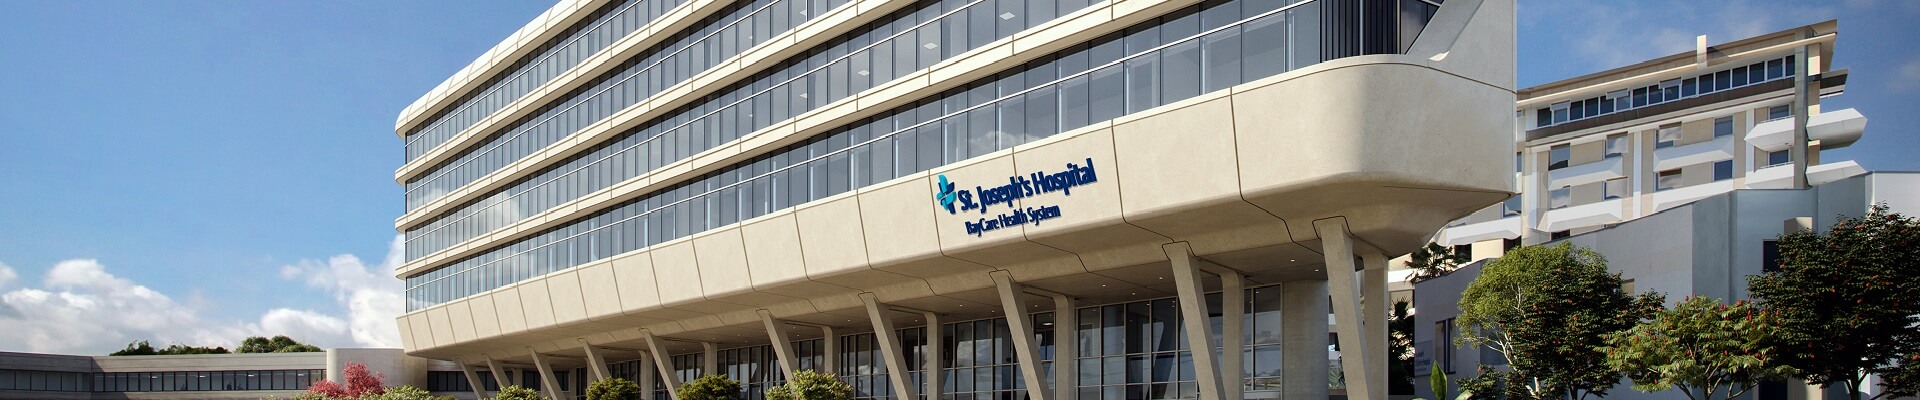 st. joseph's hospital's new tower, exterior view of a large building with a blue text sign.jpg